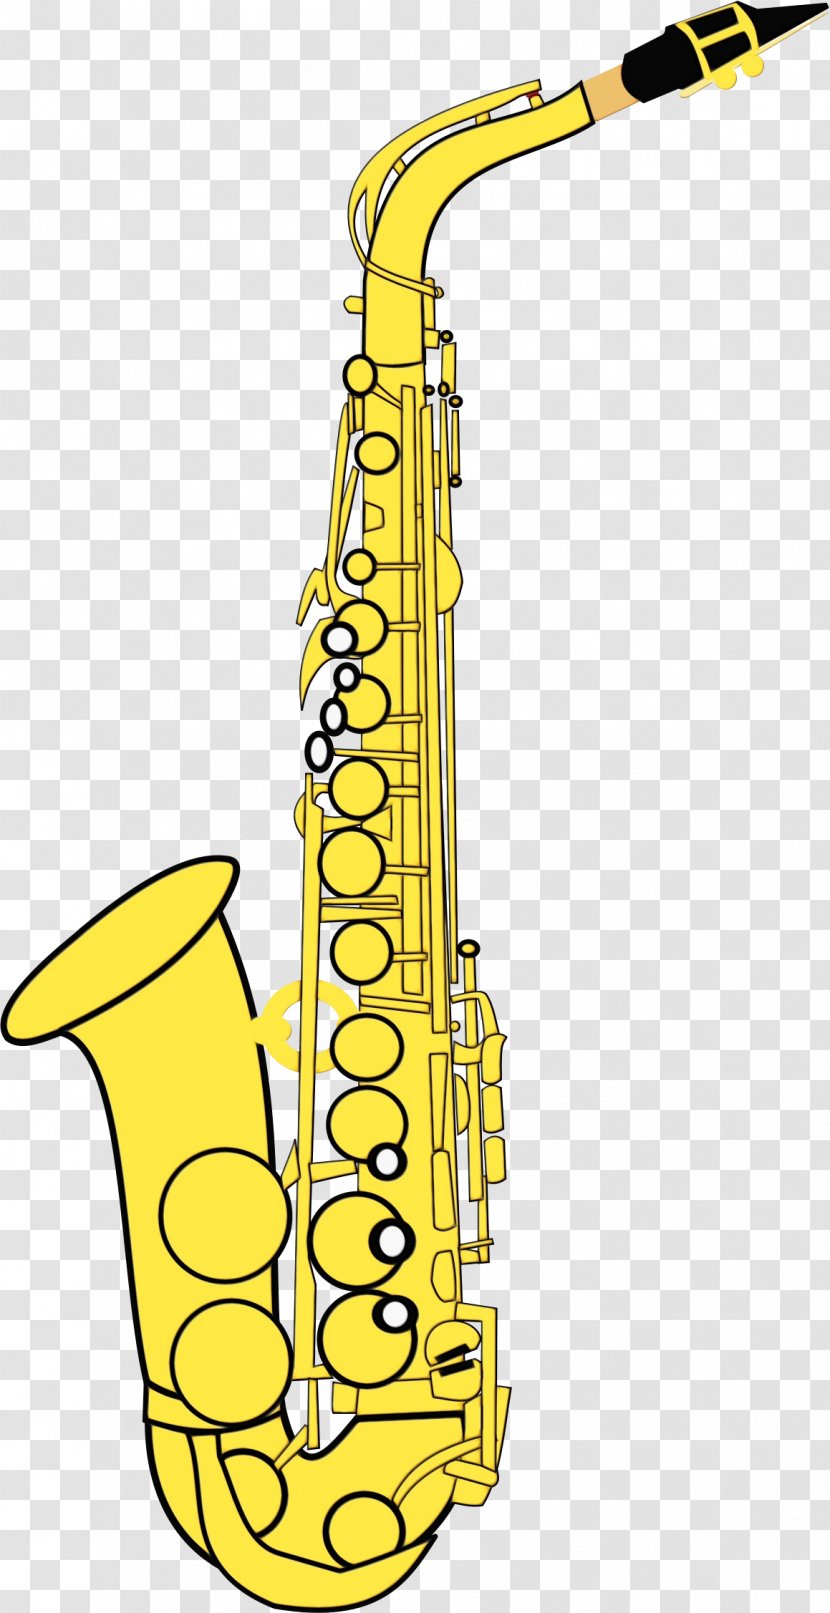 Clarinet Family Saxophone Woodwind Instrument Musical Reed - Watercolor - Indian Instruments Transparent PNG